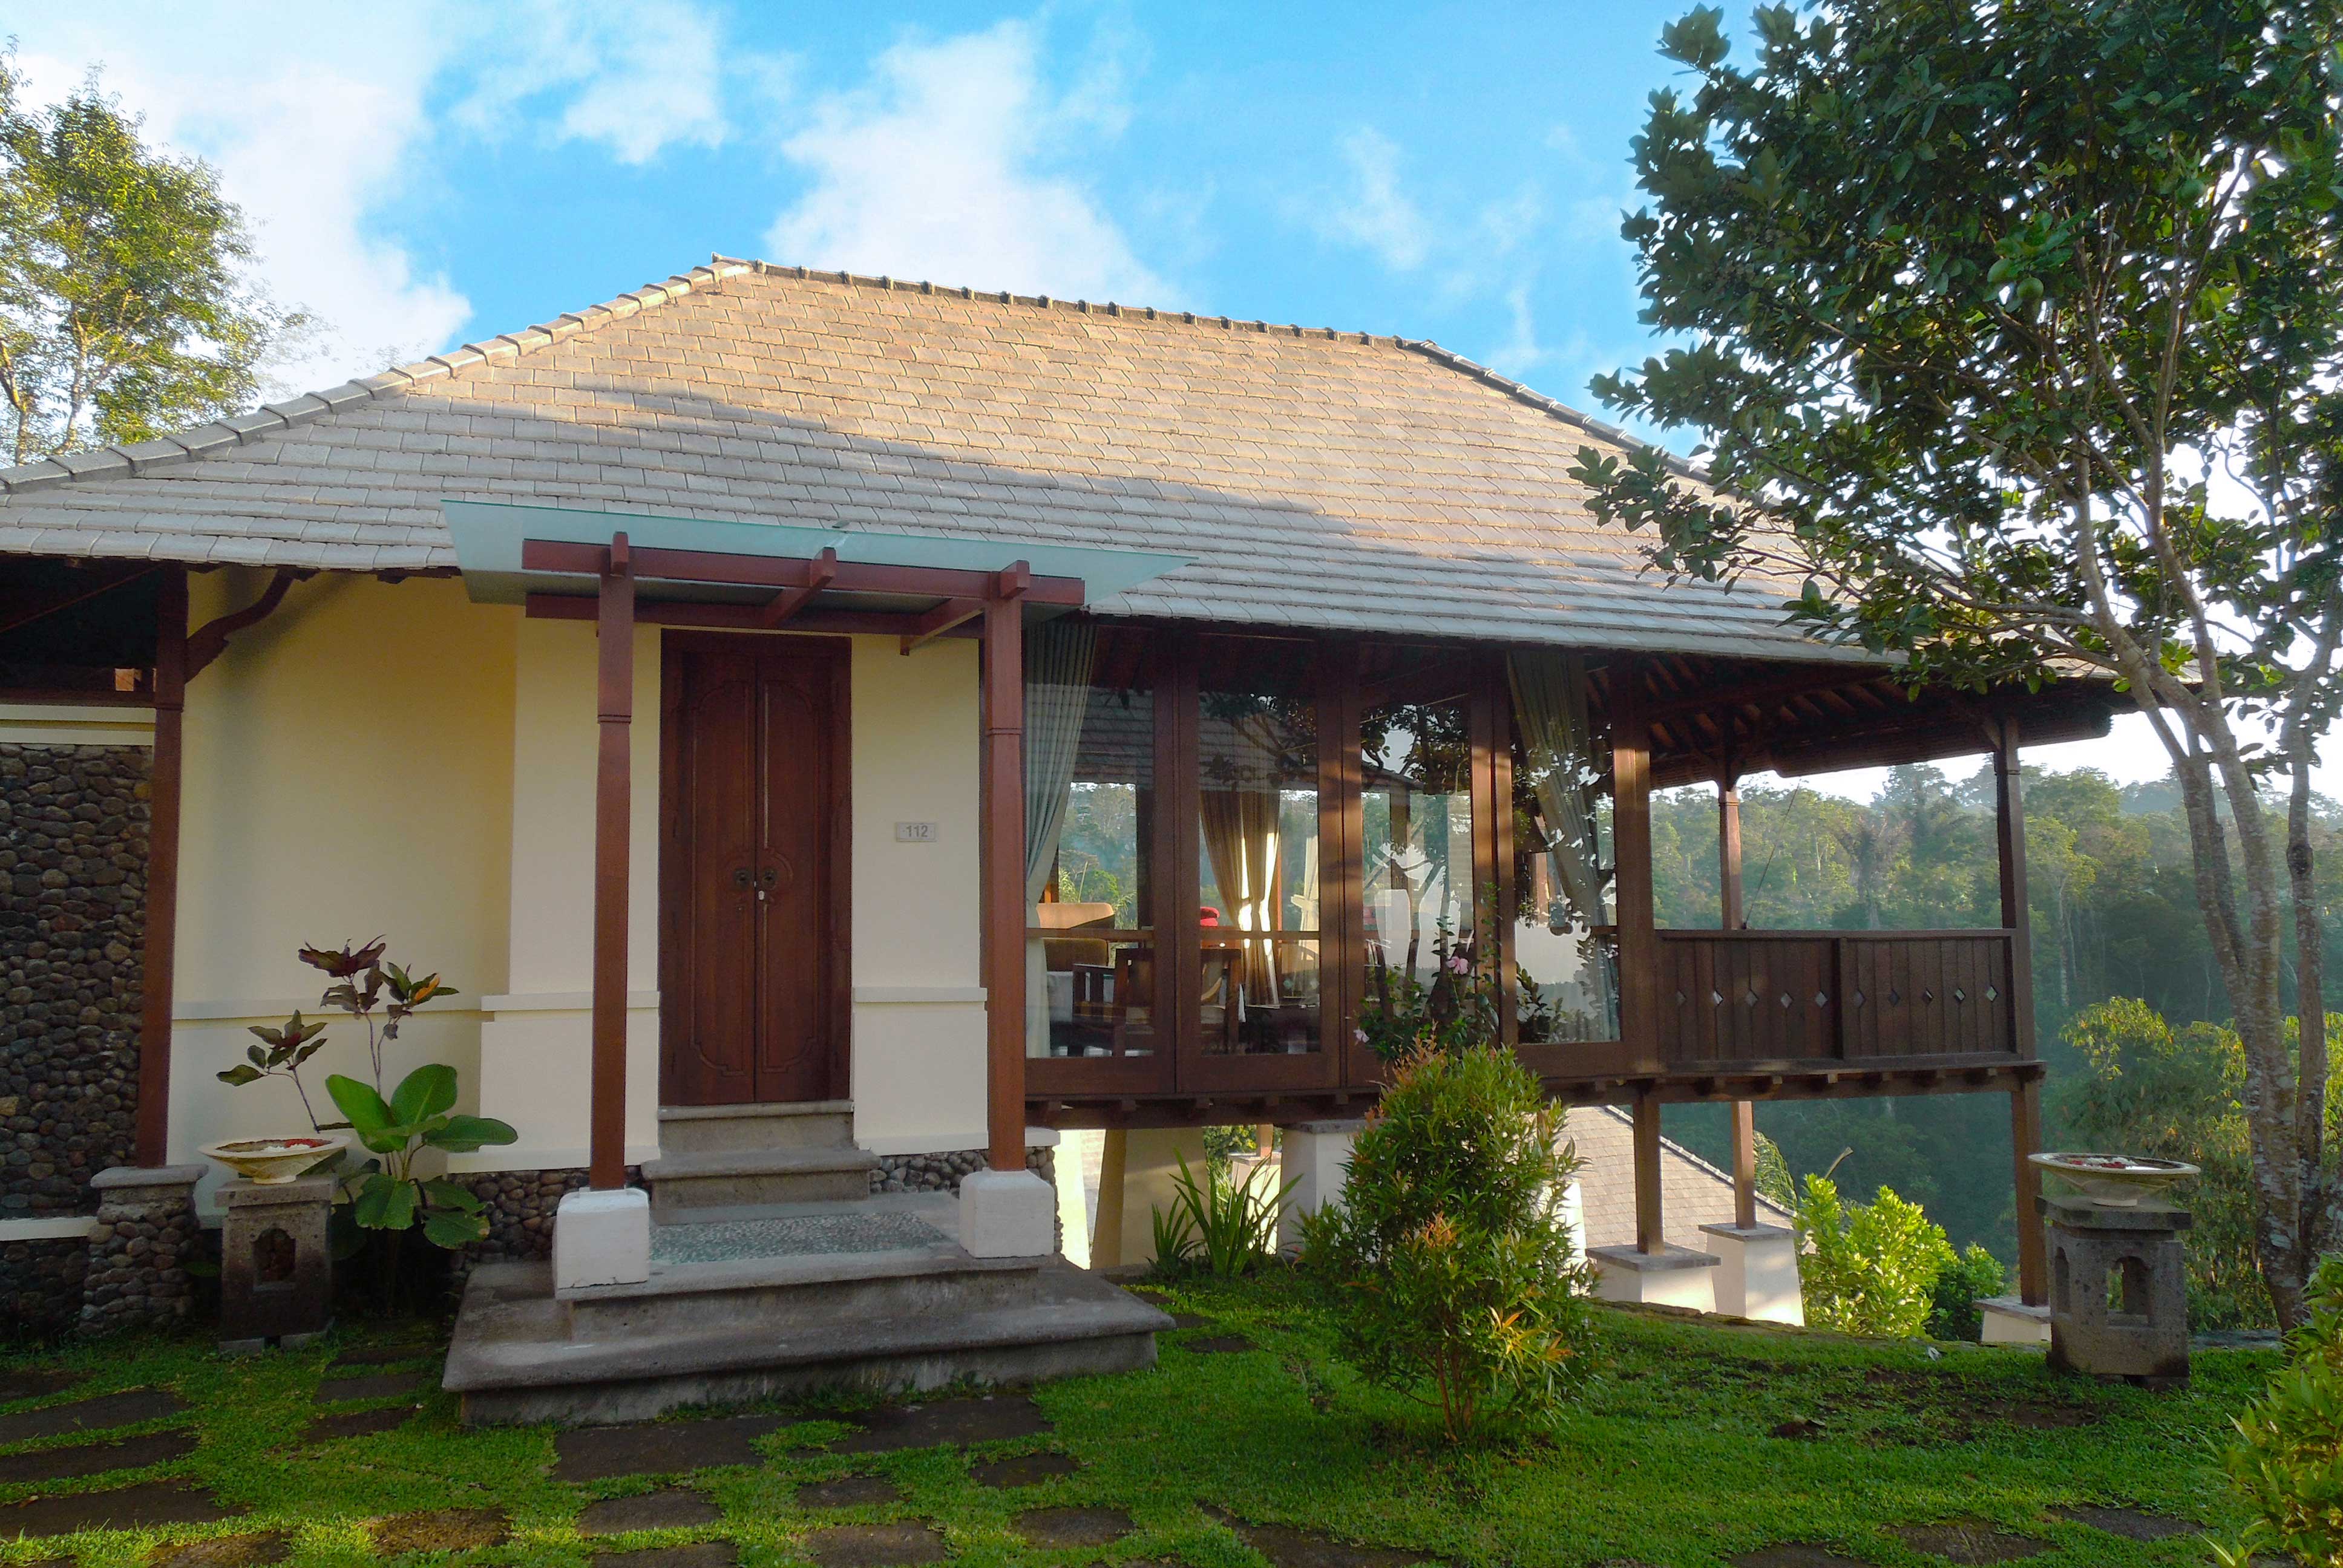 Exterior view of Luxury Farm Villa from the entrance